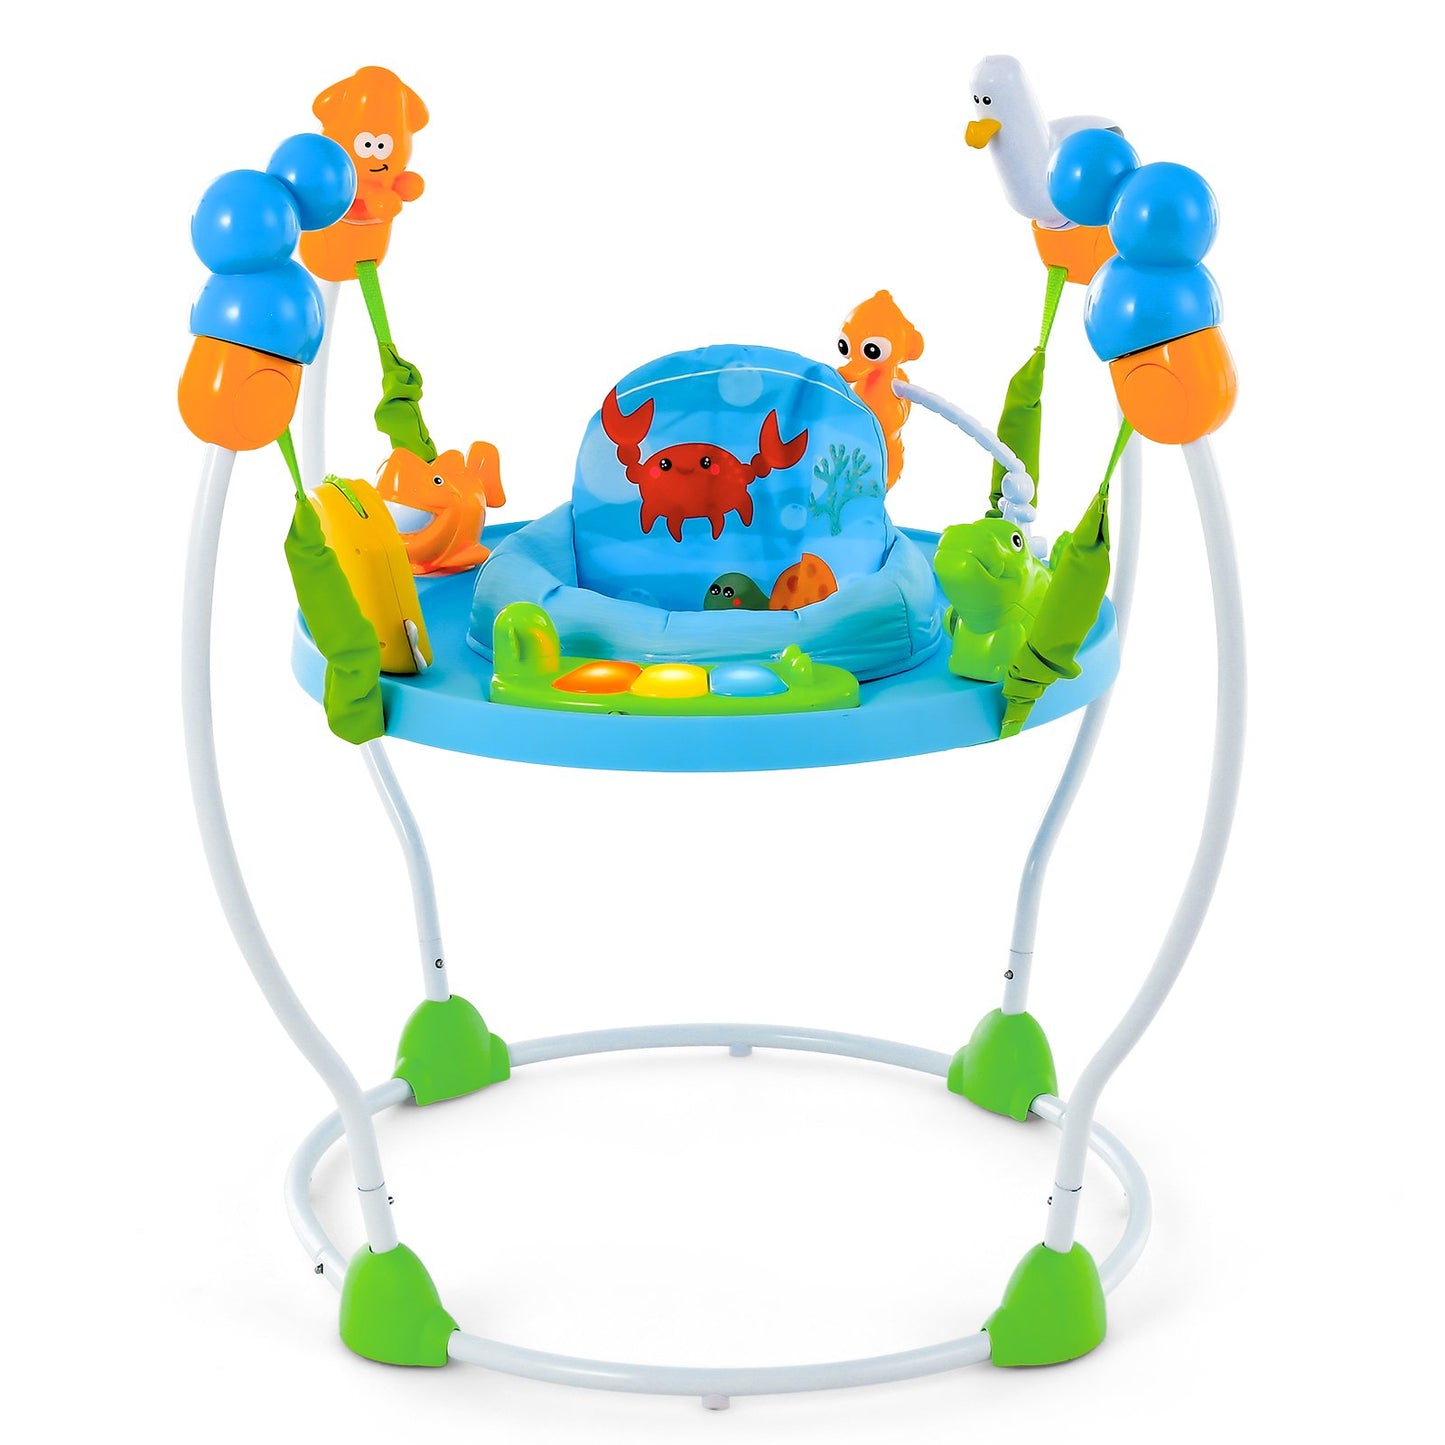 Underwater World Themed Baby Bouncer with Developmental Toys, Blue